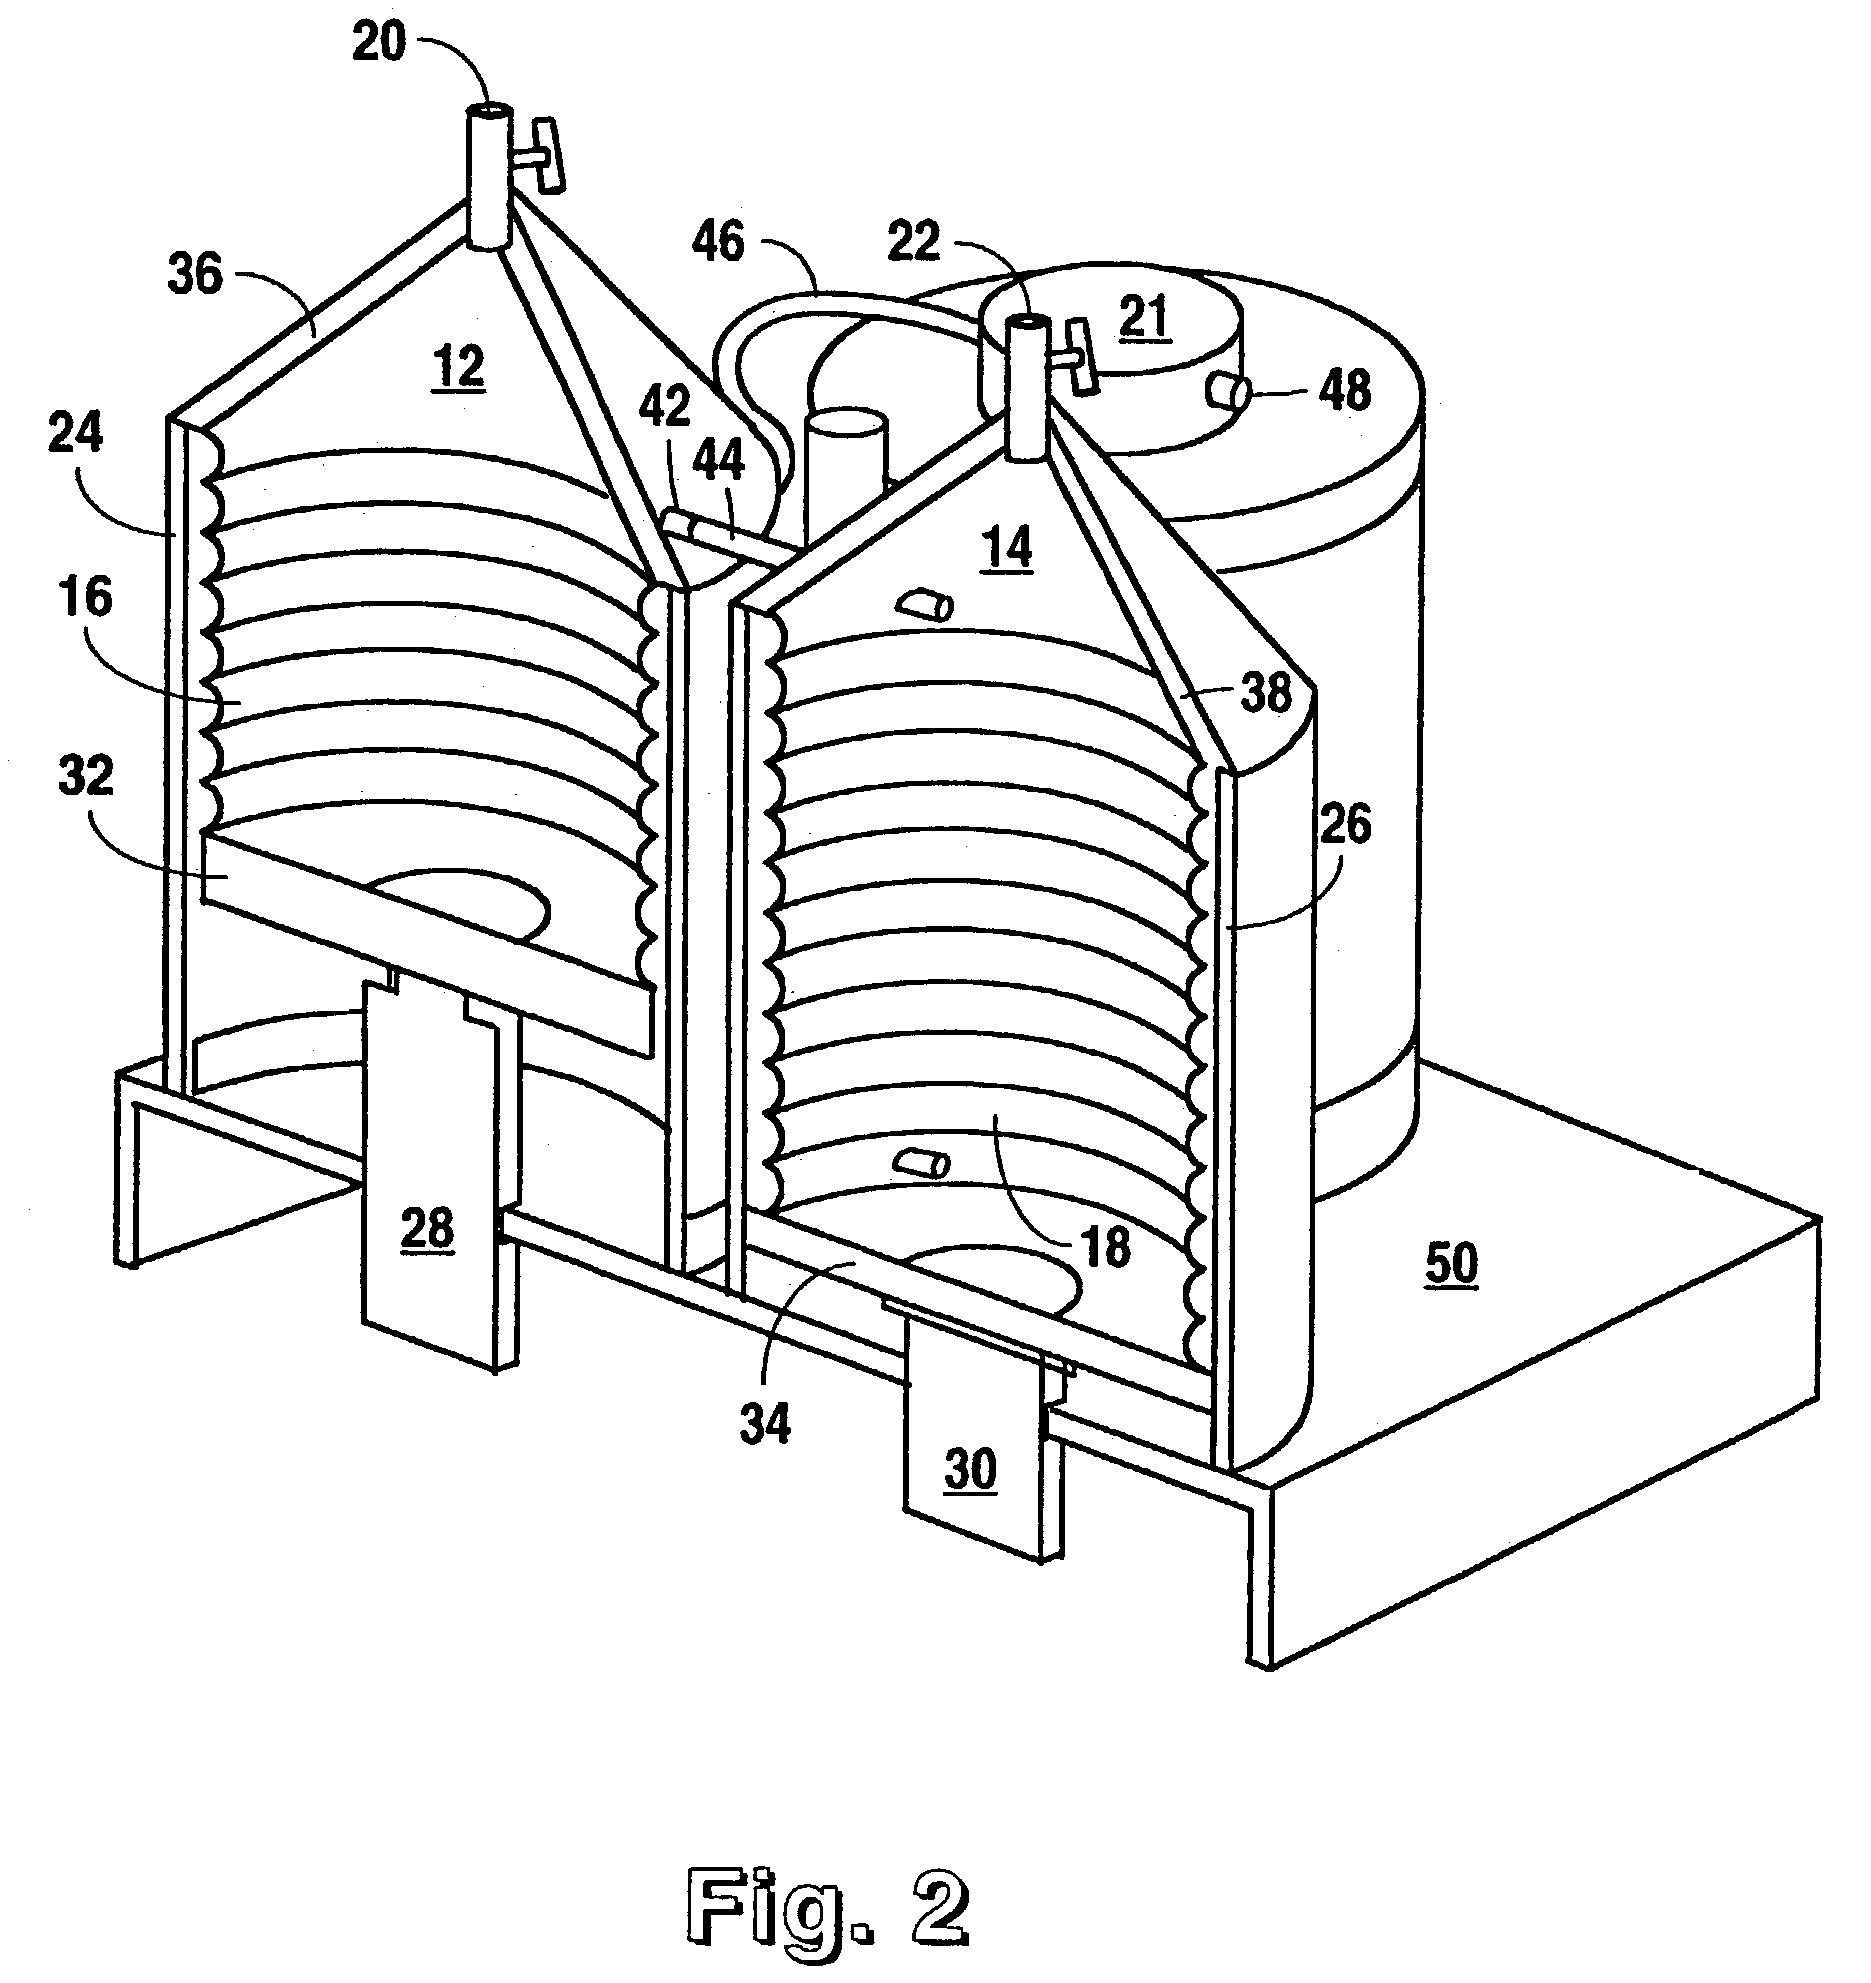 Cardiac support device and method